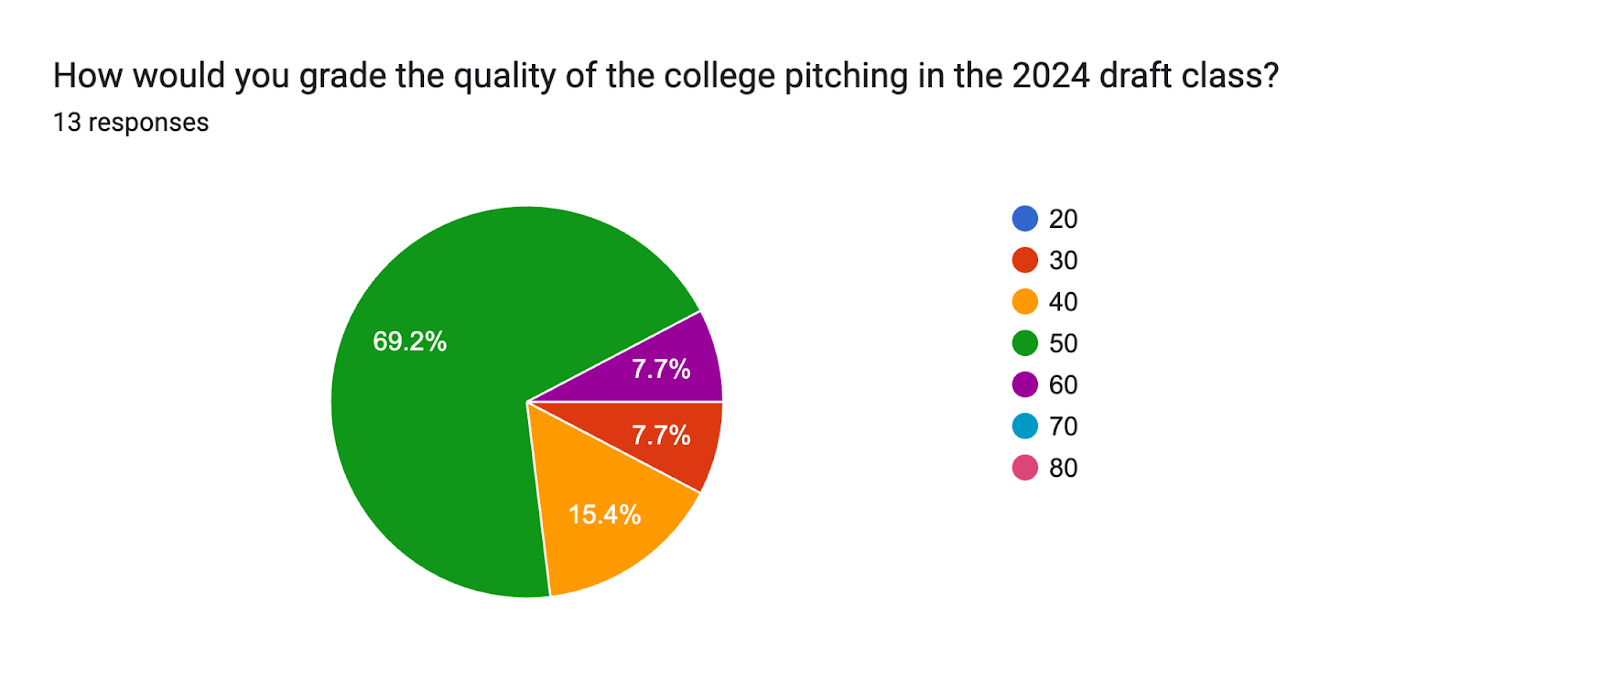 Forms response chart. Question title: How would you grade the quality of the college pitching in the 2024 draft class?. Number of responses: 13 responses.